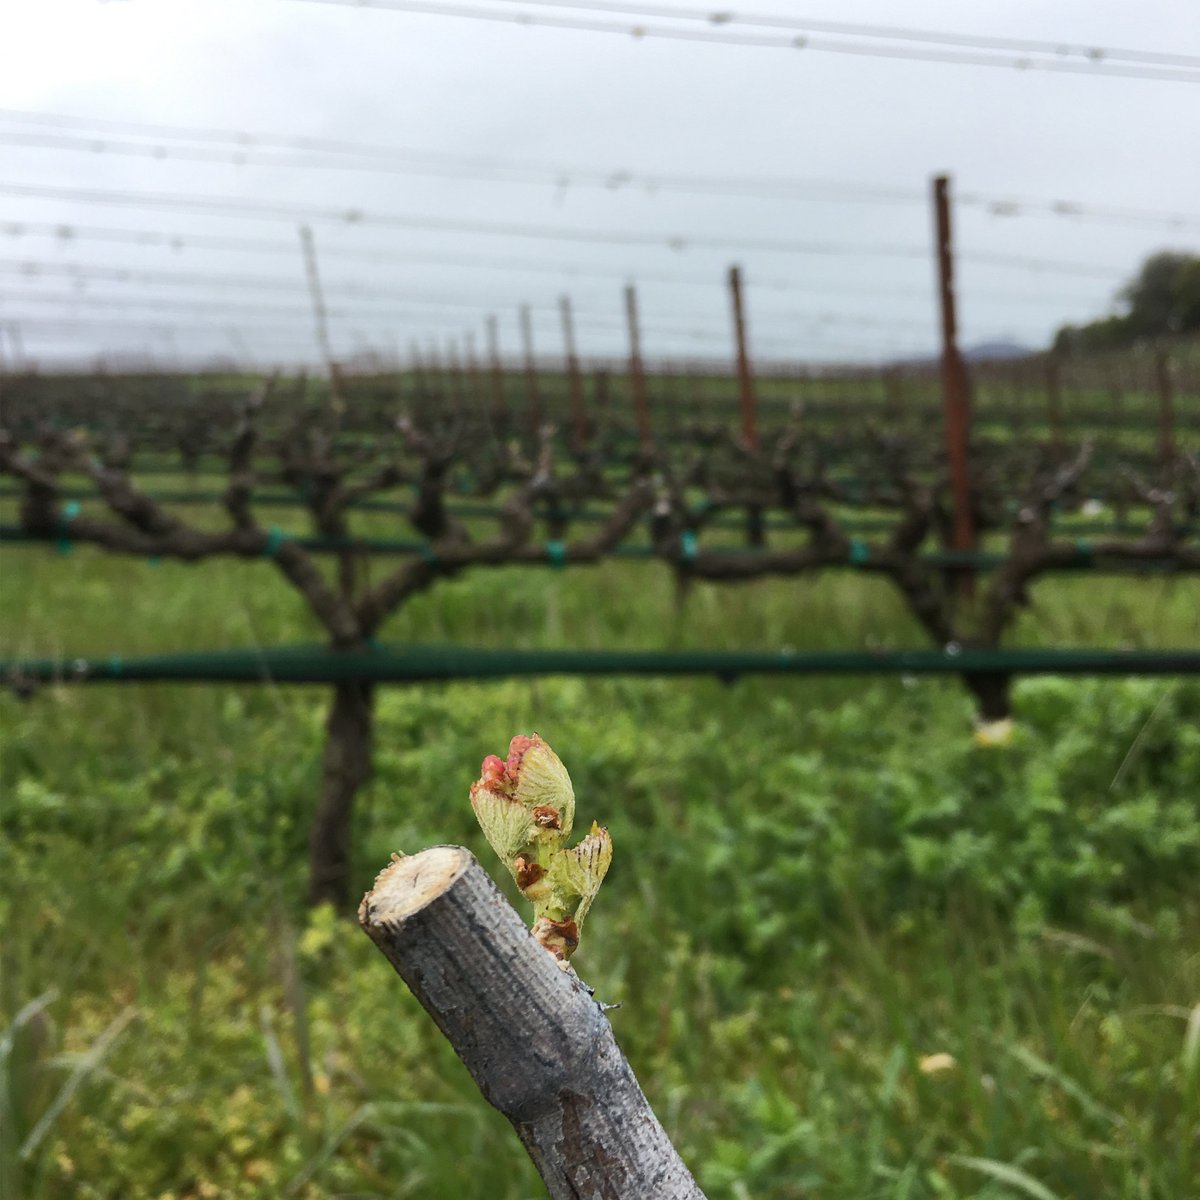 It's the first day of spring and we couldn't be more excited! Our Old Wente selection of Chardonnay has seen budbreak and our vineyard is enjoying welcome rain showers today. 📷: Dave Wilson